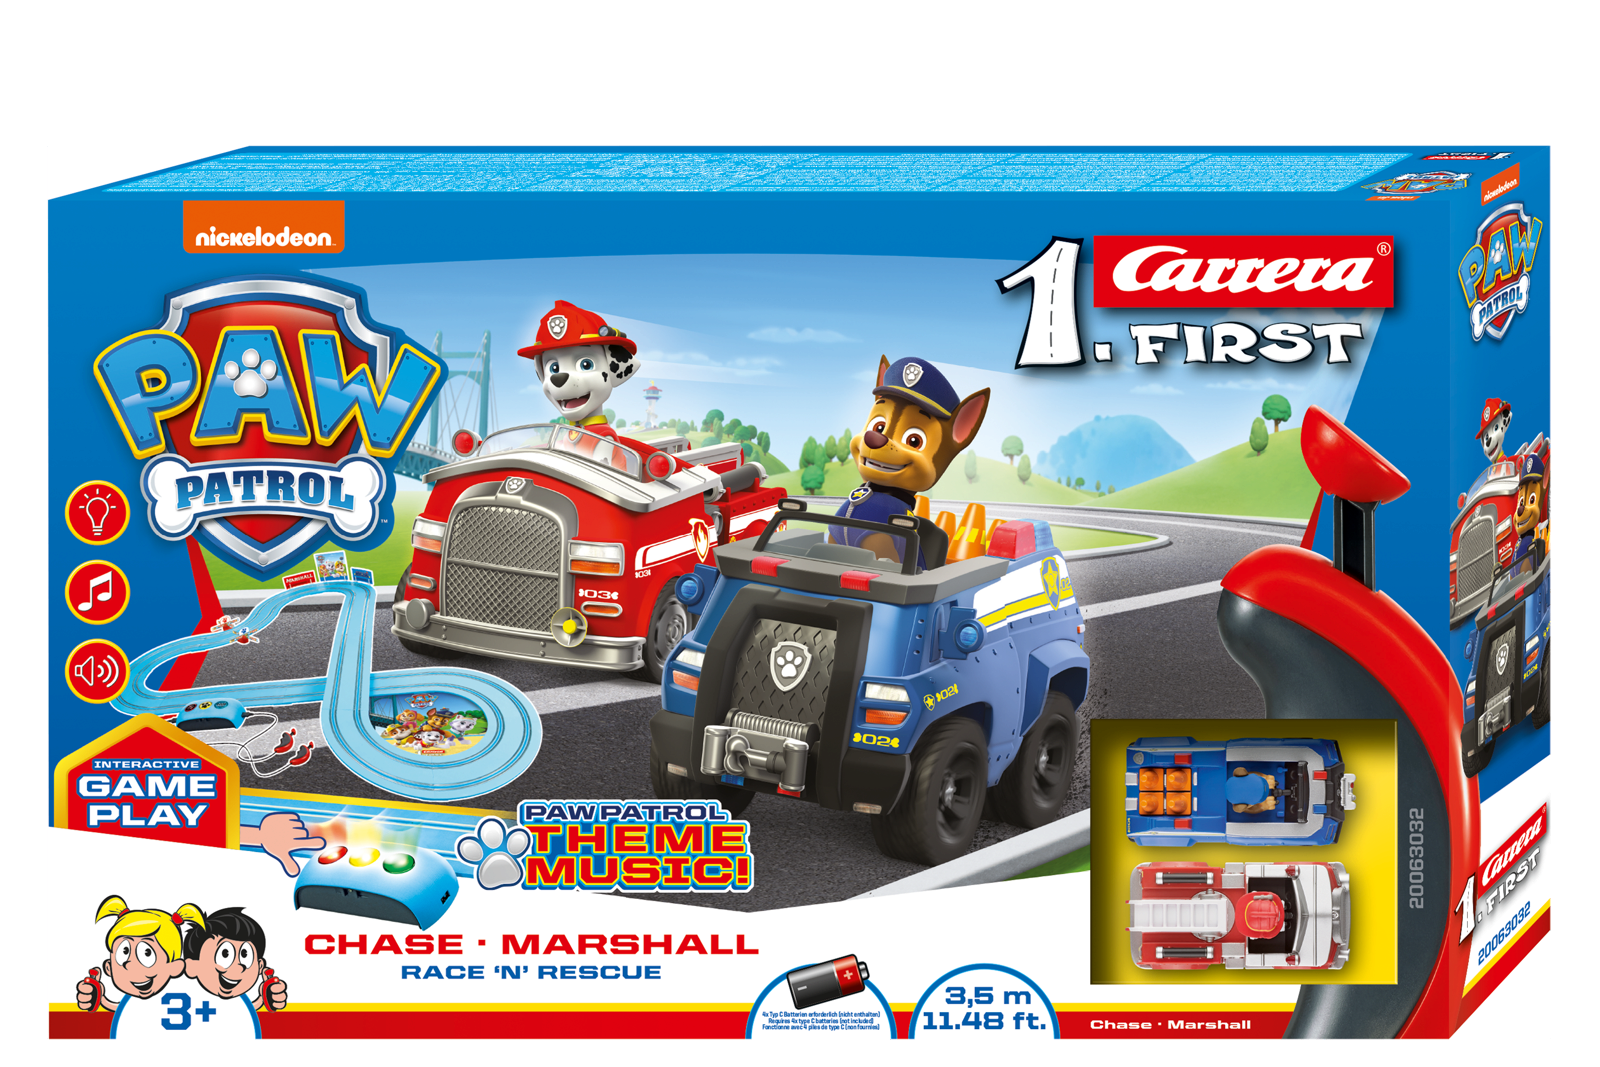 Carrera 63032 FIRST Paw Patrol Race 'n' Rescue 3.5 m - Chase & Marshall